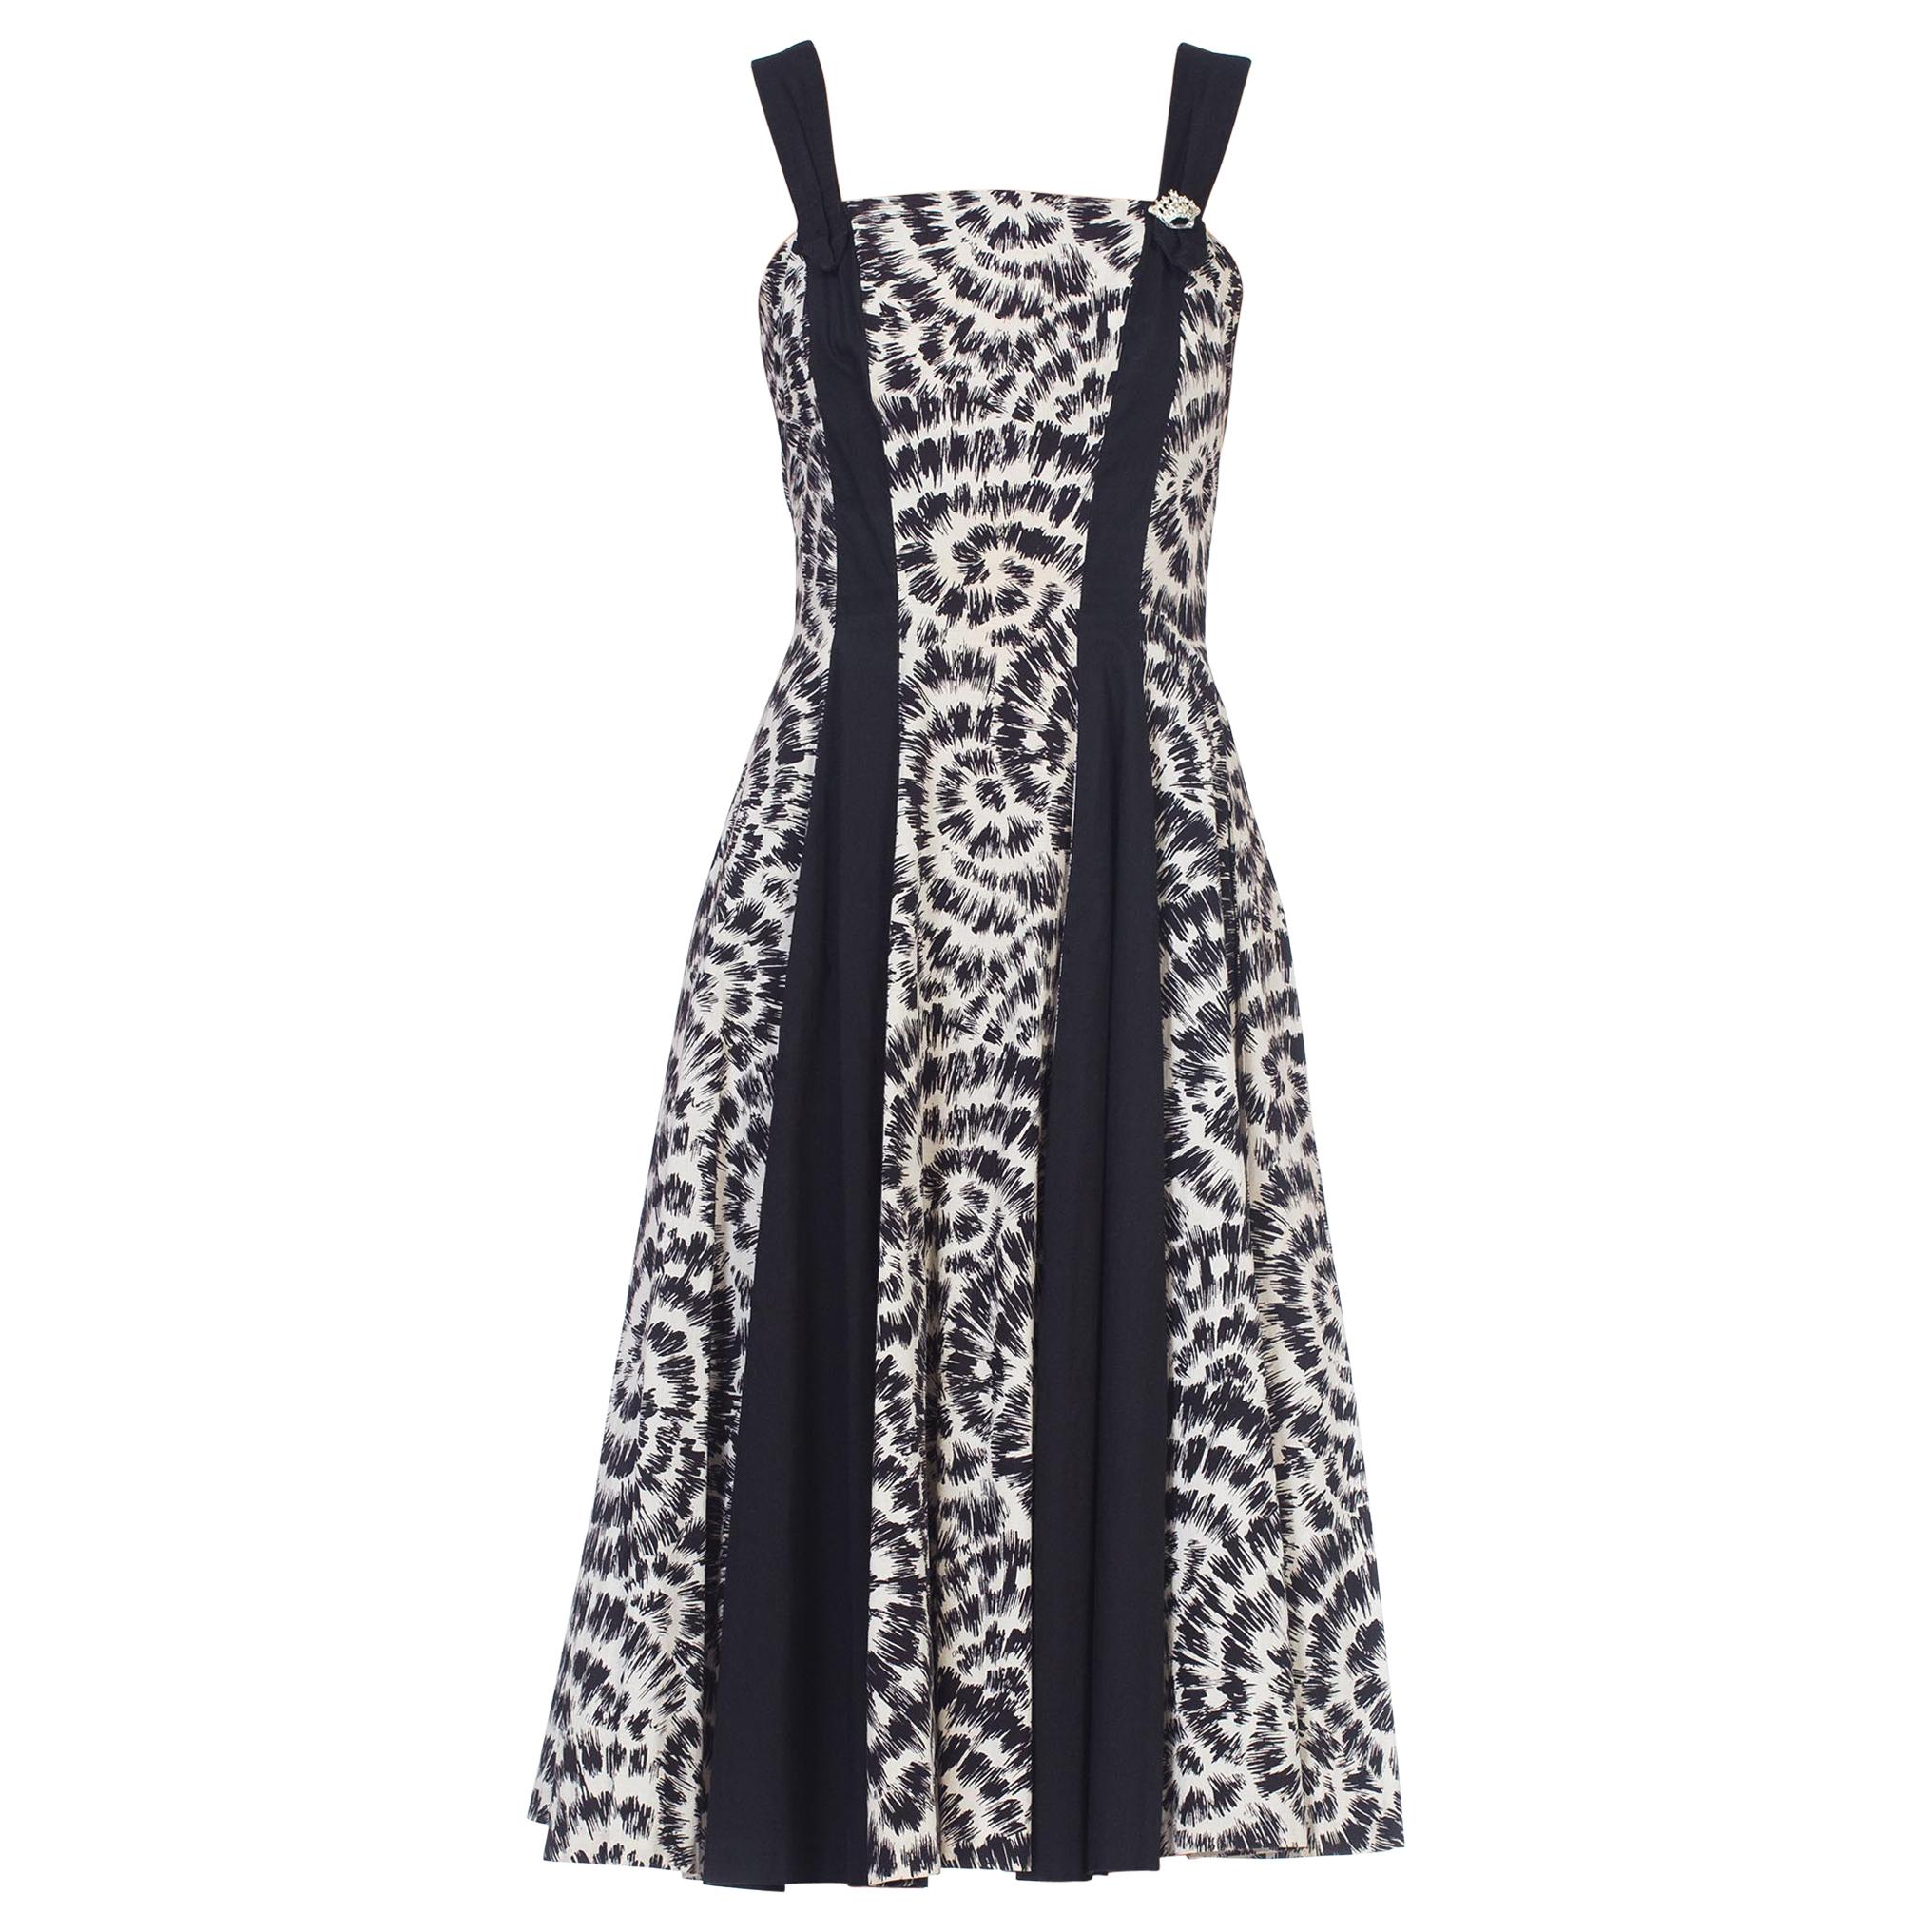 1950S Black & White Printed Cotton Fit Flare Dress